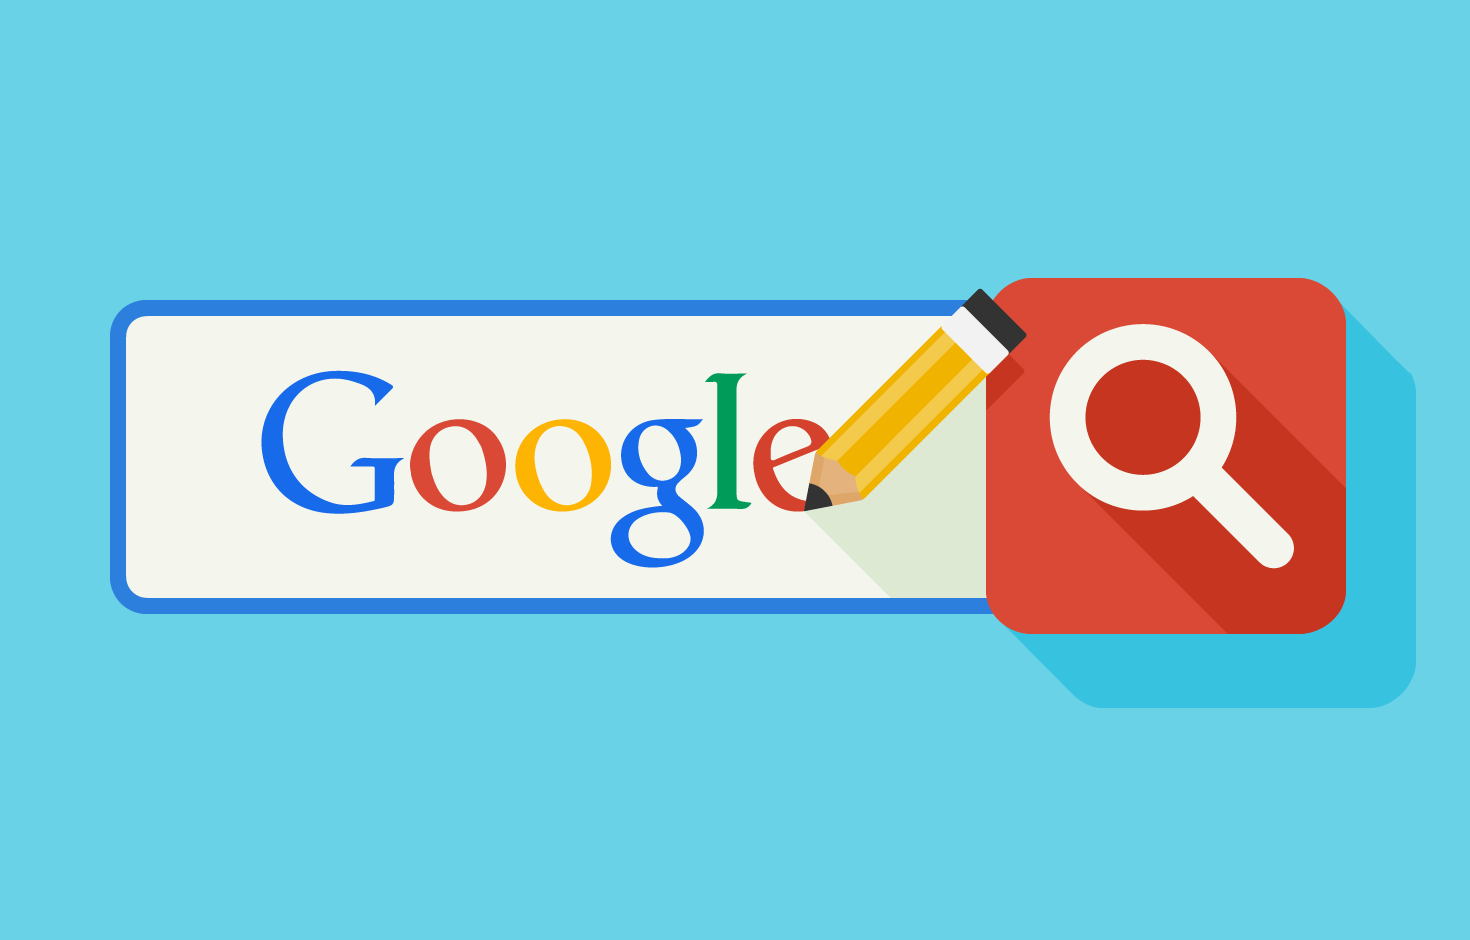 Mobile Search Is Google’s New Priority